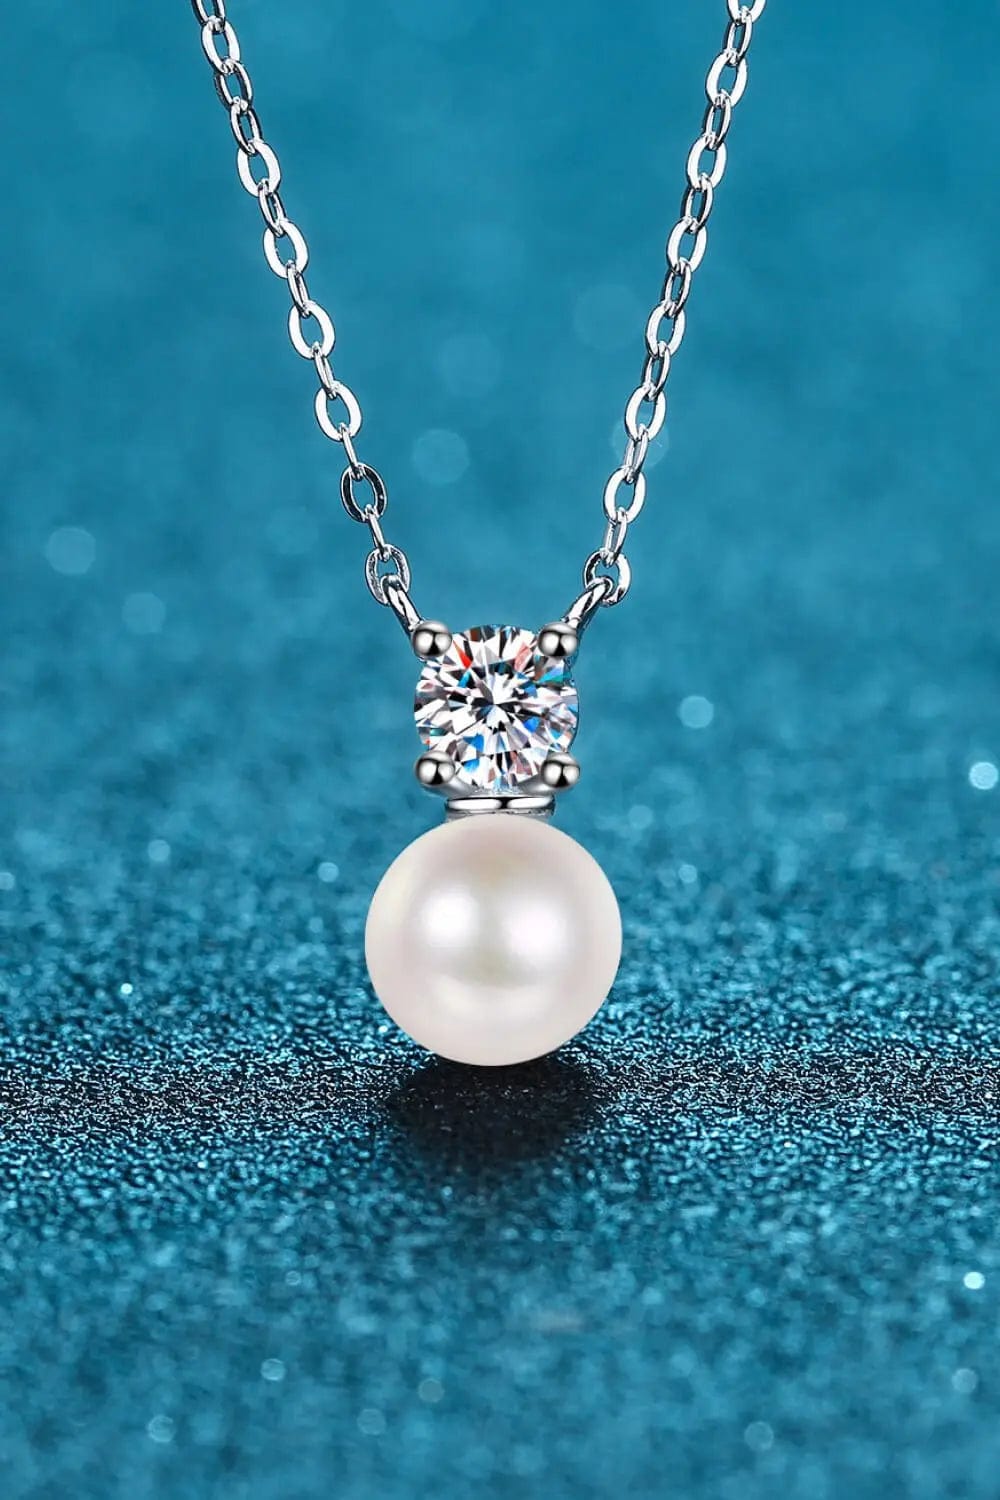 925 Sterling Silver Freshwater Pearl Moissanite Necklace - CLASSY CLOSET BOUTIQUE925 Sterling Silver Freshwater Pearl Moissanite Necklacejewelry100100473078262100100473078262Silver/PearlOne Size